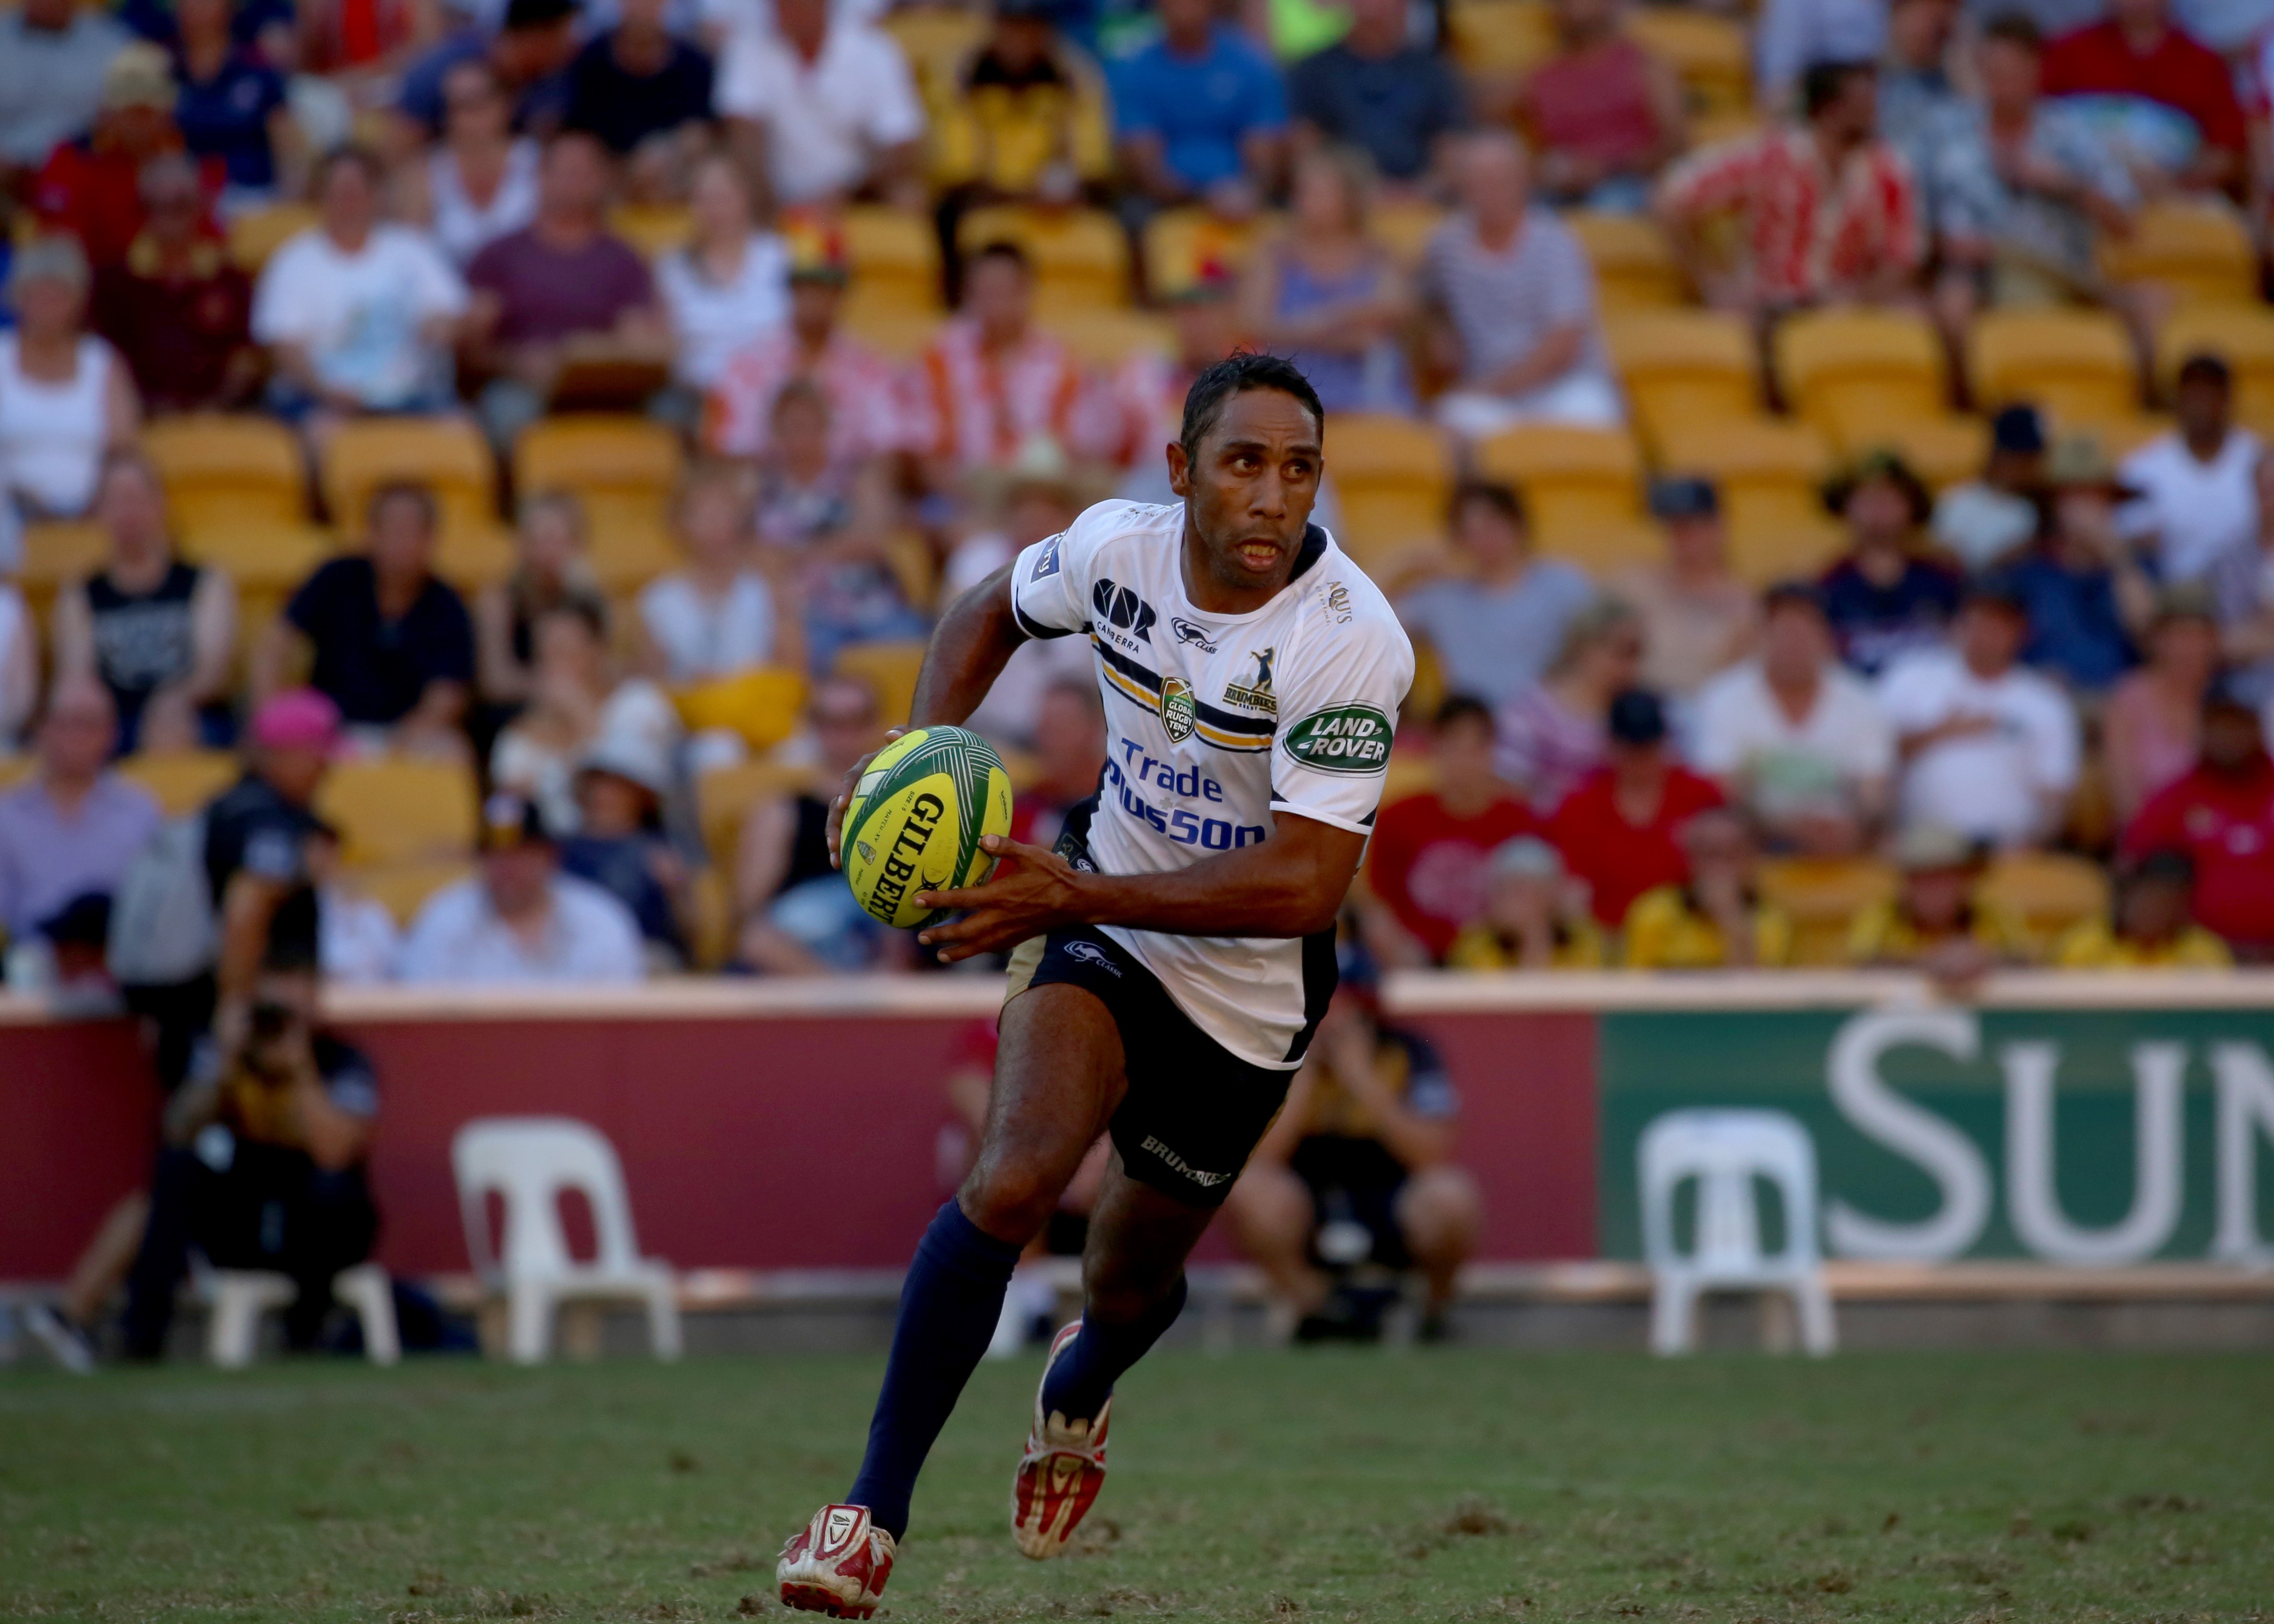 Tim Gavel picks the greatest Brumbies of all time